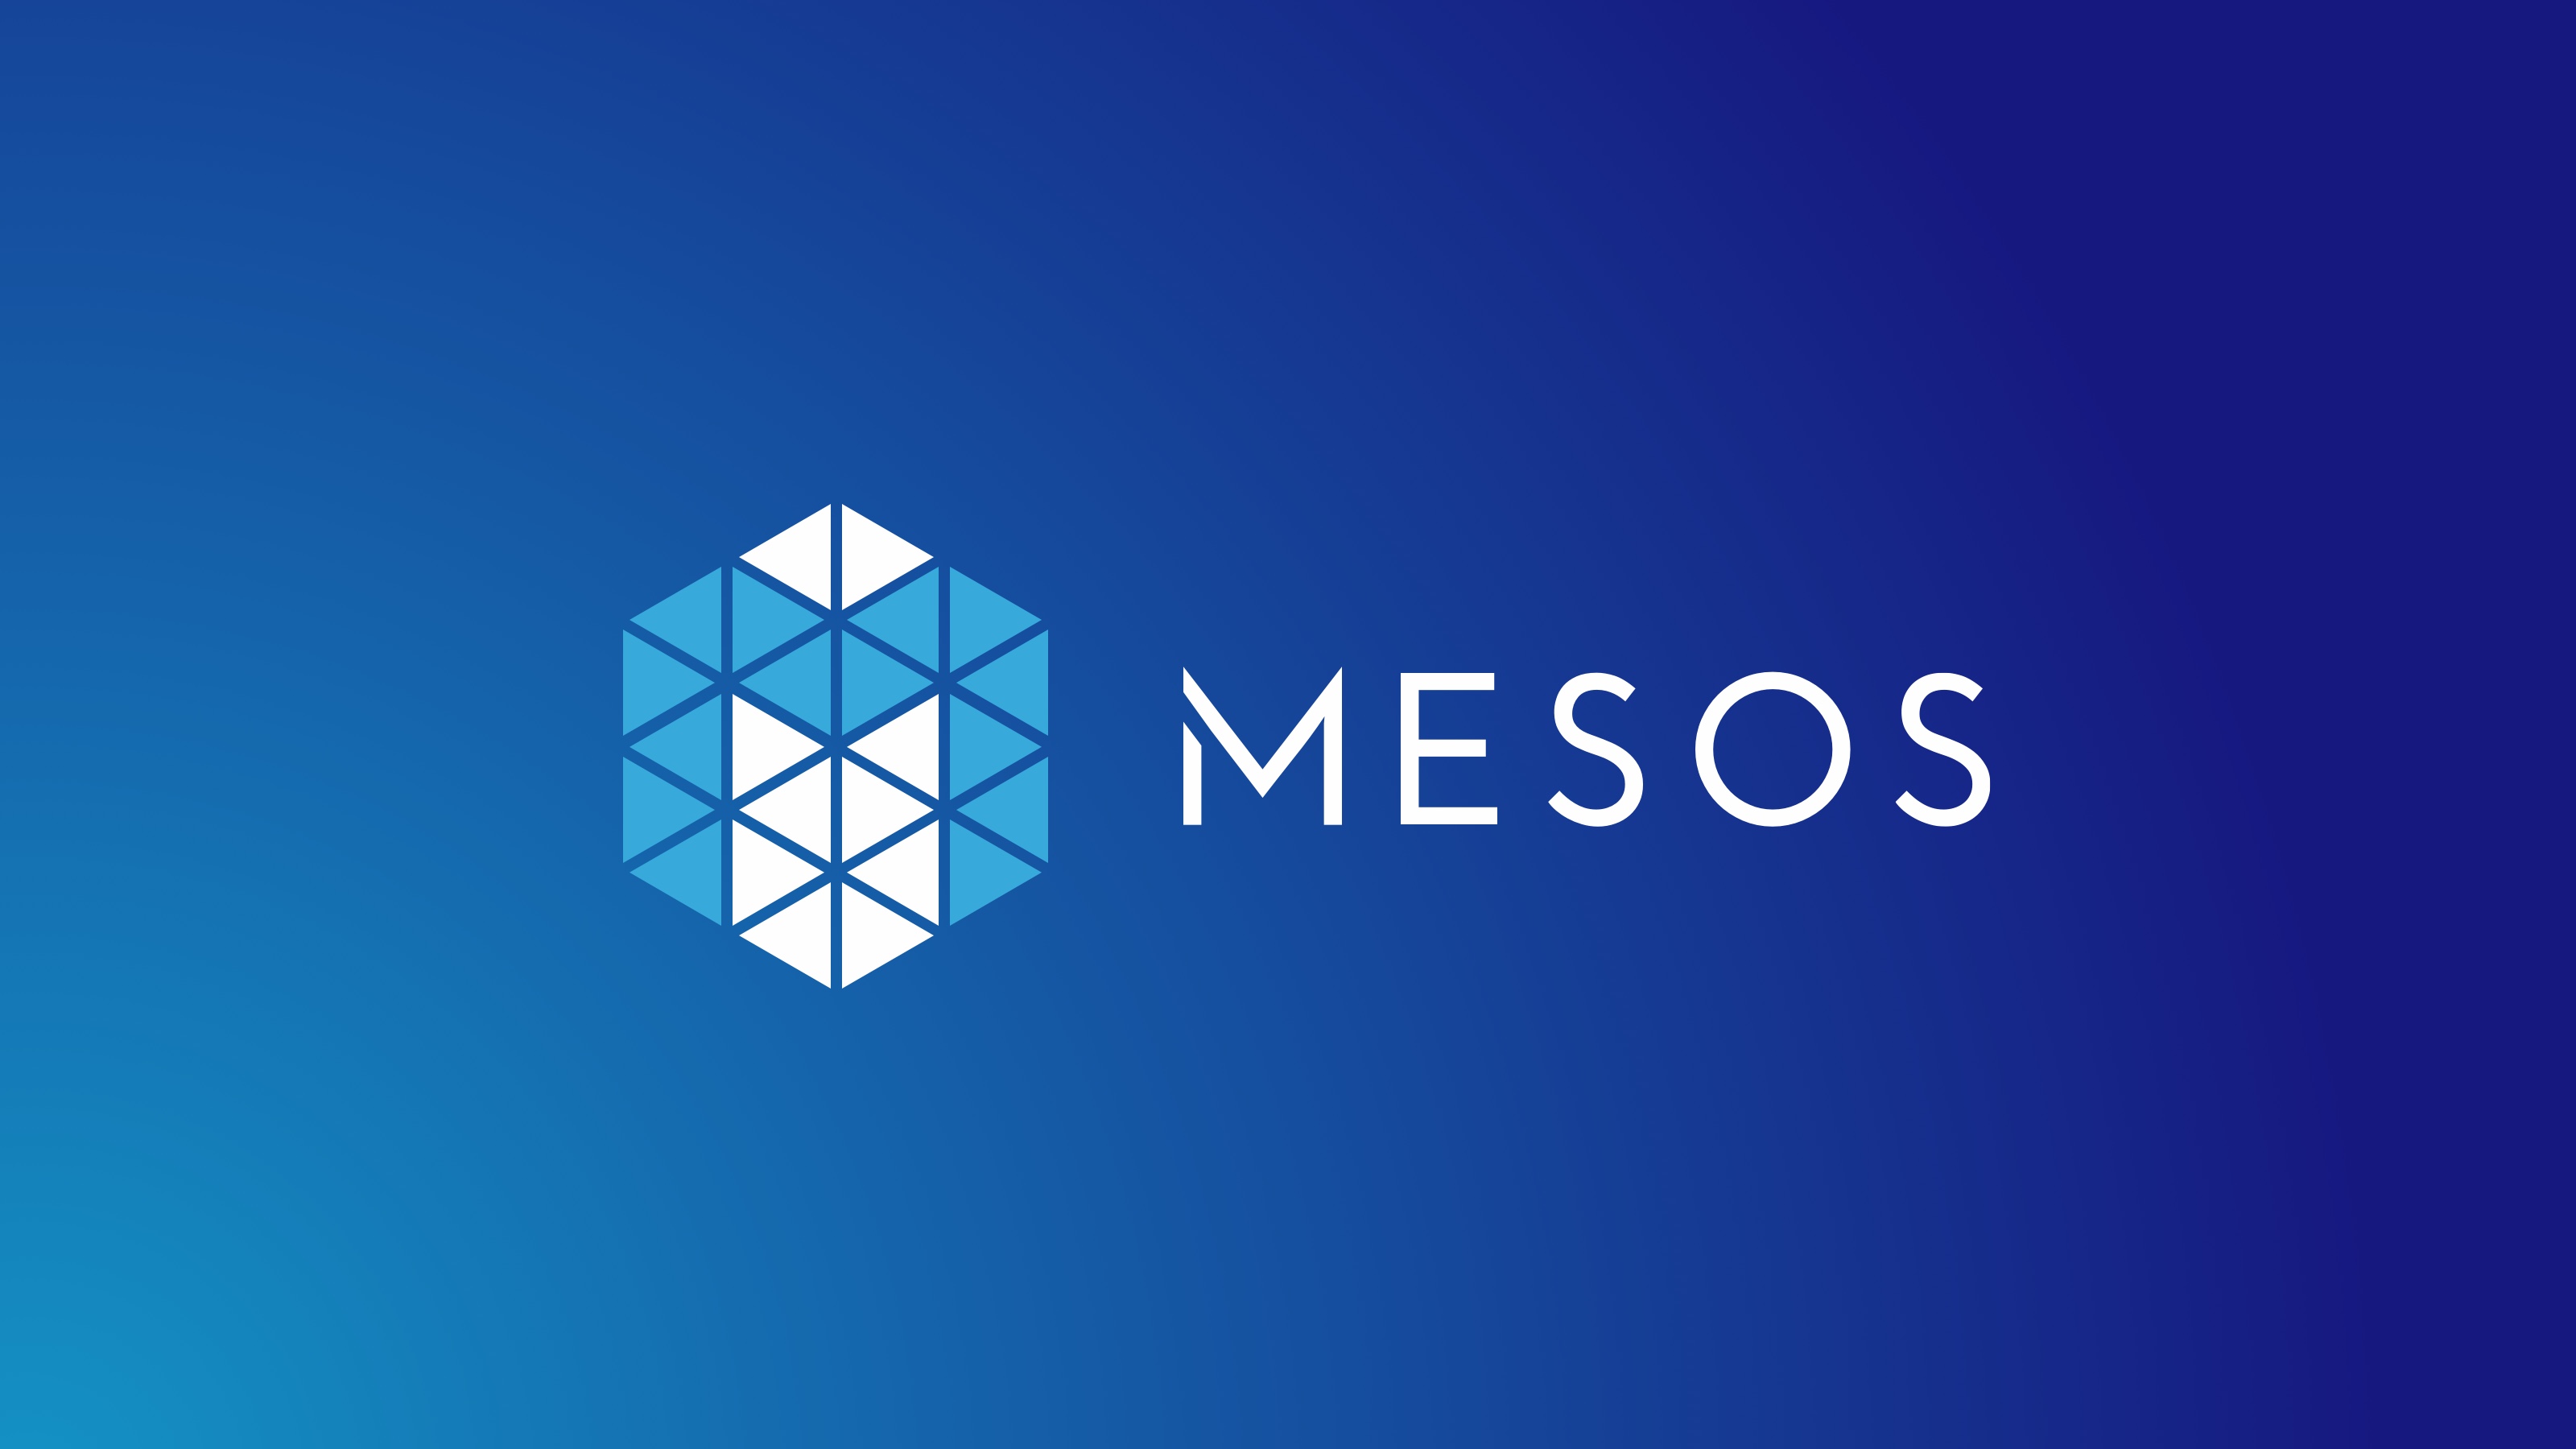 Apache Mesos 1.5 Improves Storage, Performance, Resource Management, and Containerization